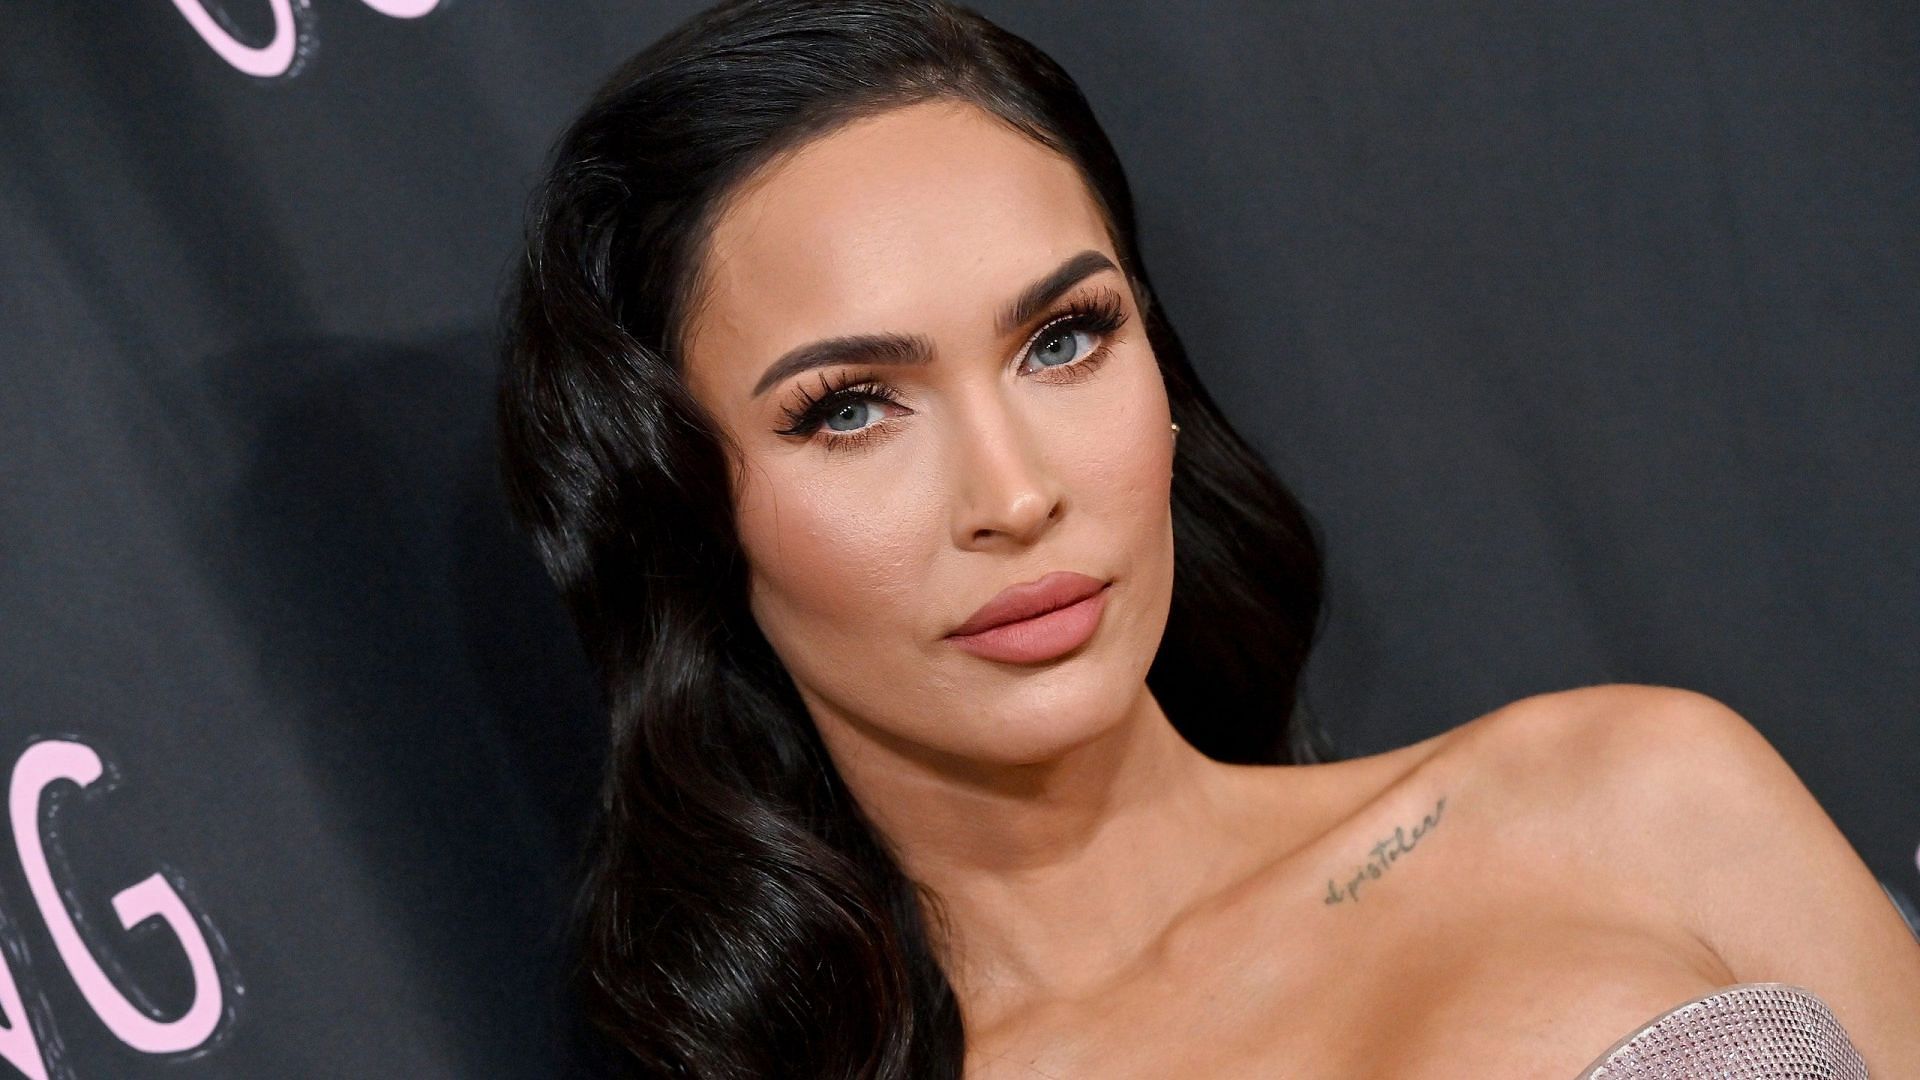 Social media users bashed Fox for using Ukrainian reference in a demeaning way in her caption on Instagram: Reactions explored. (Image via @meganfox/ Instagram)